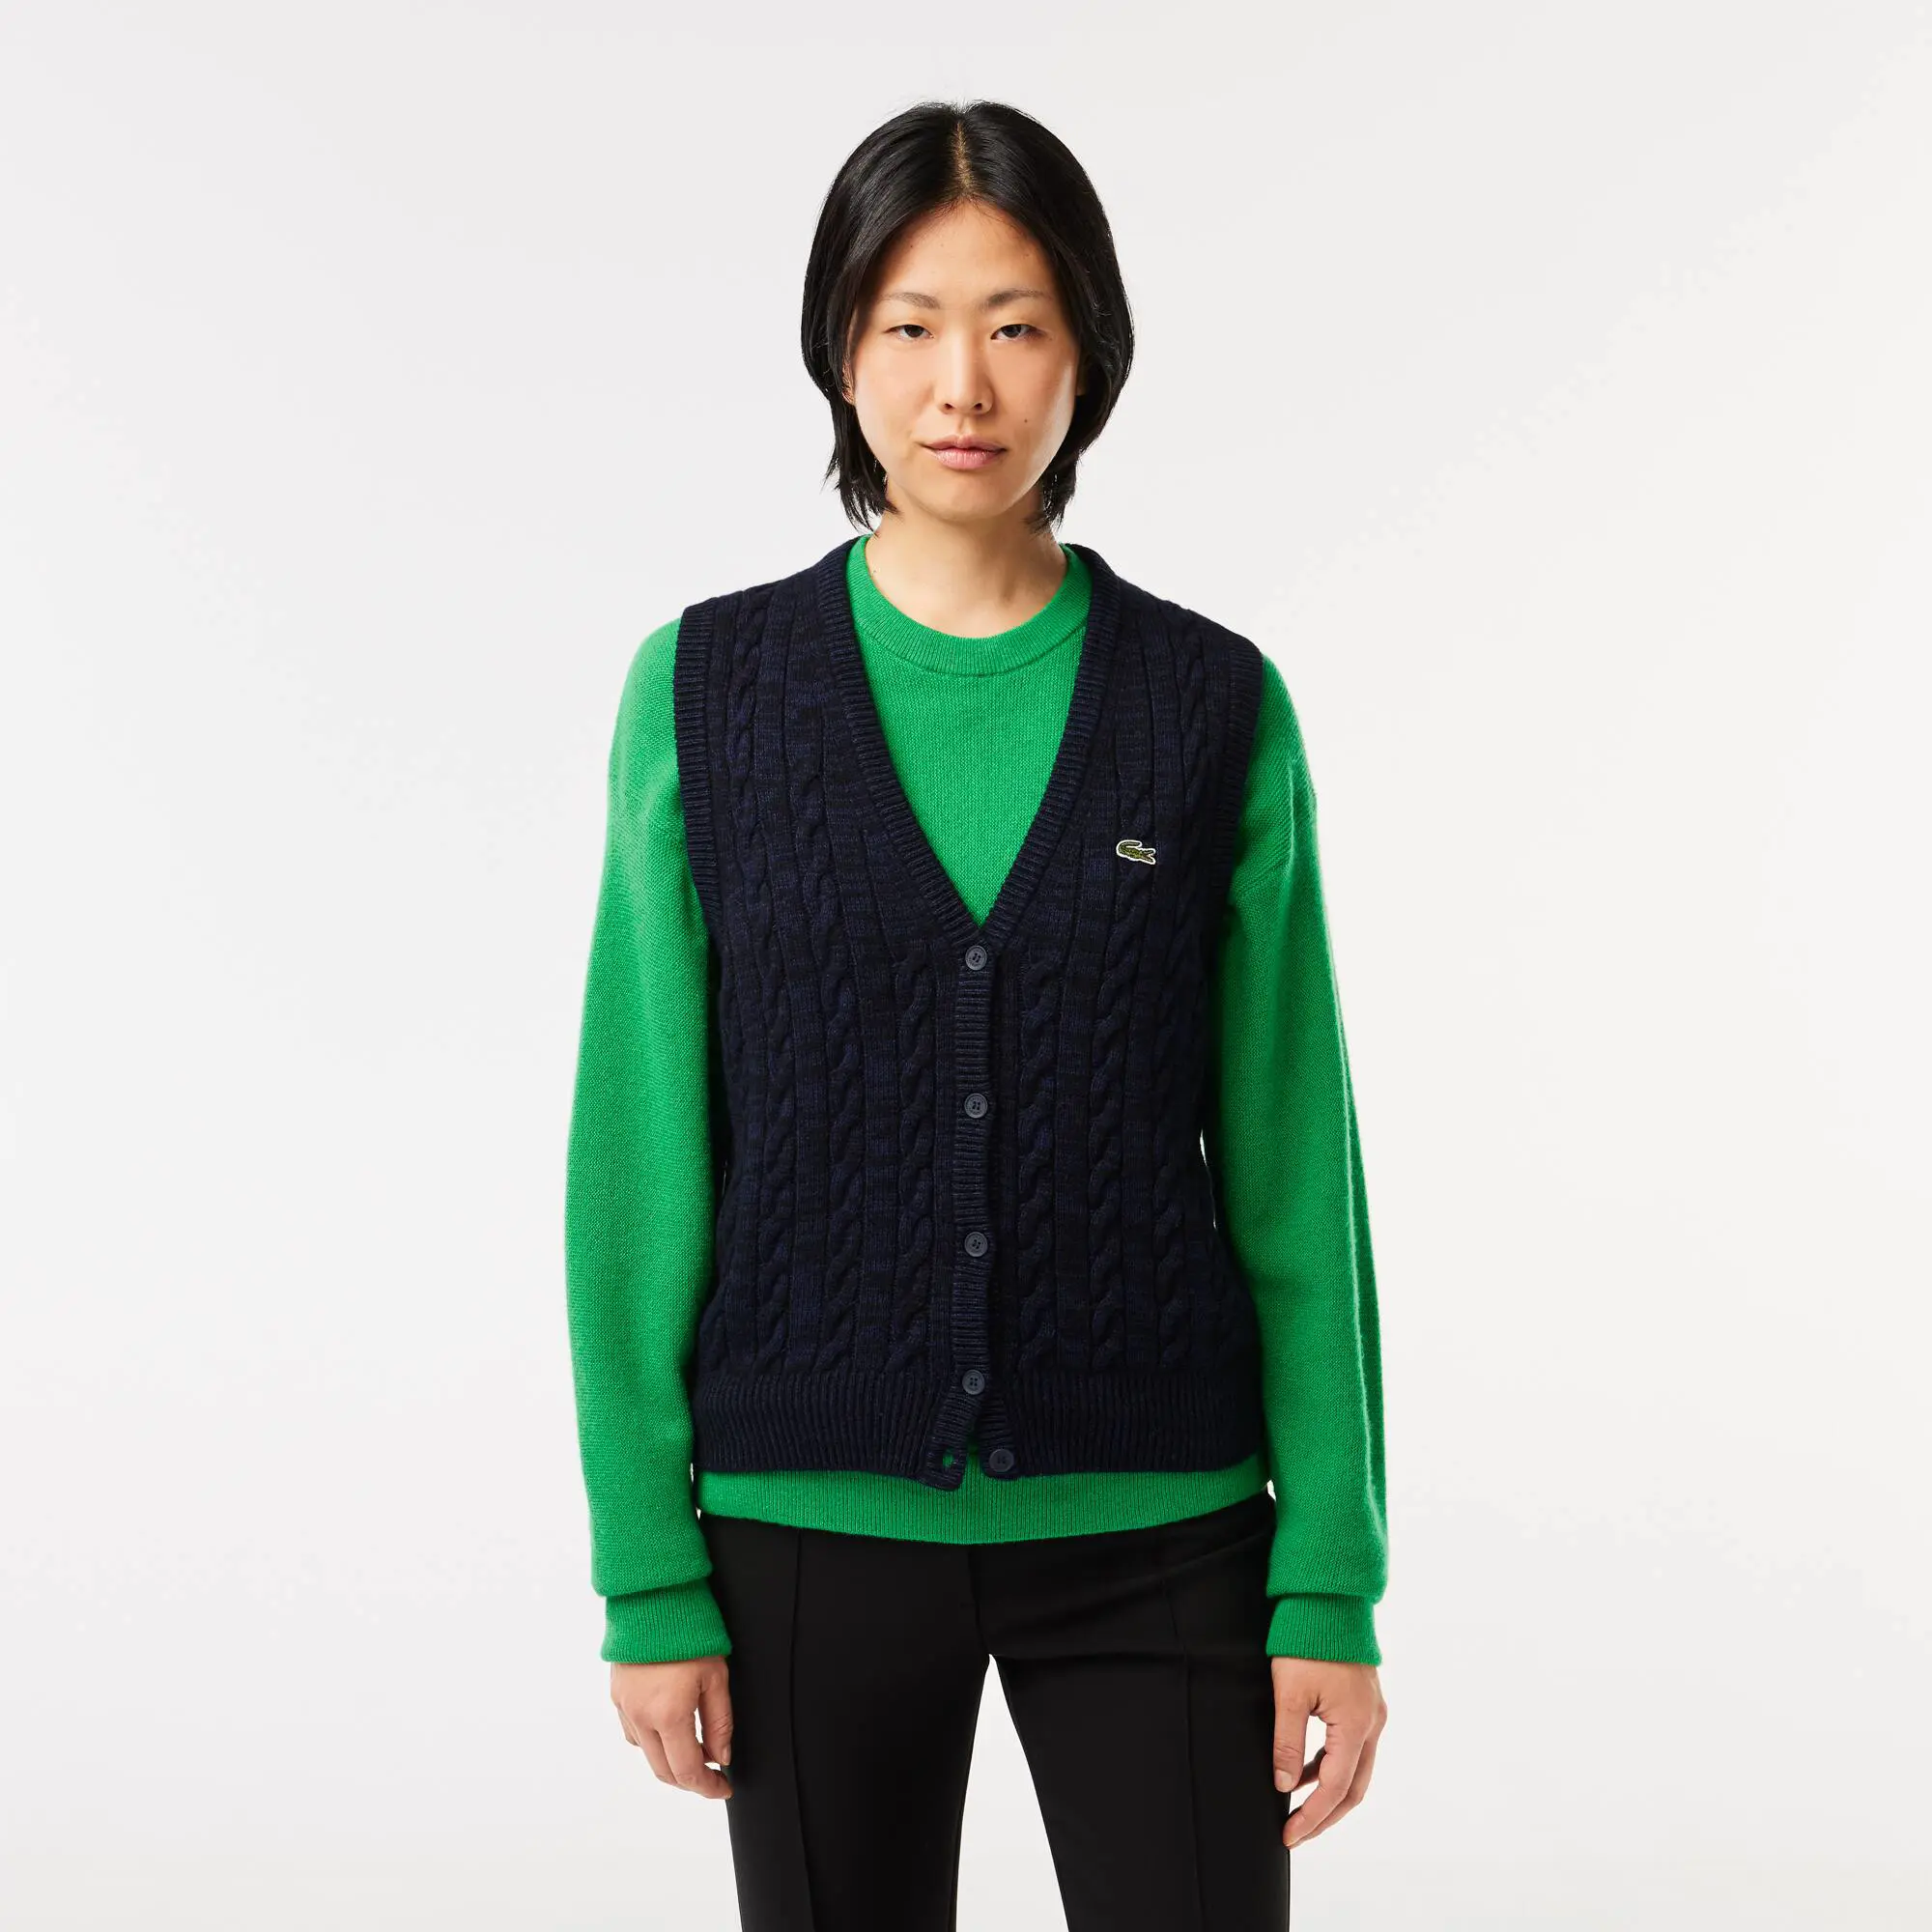 Lacoste Women's Sleeveless Cable Knit Cotton and Wool Blend Vest. 1